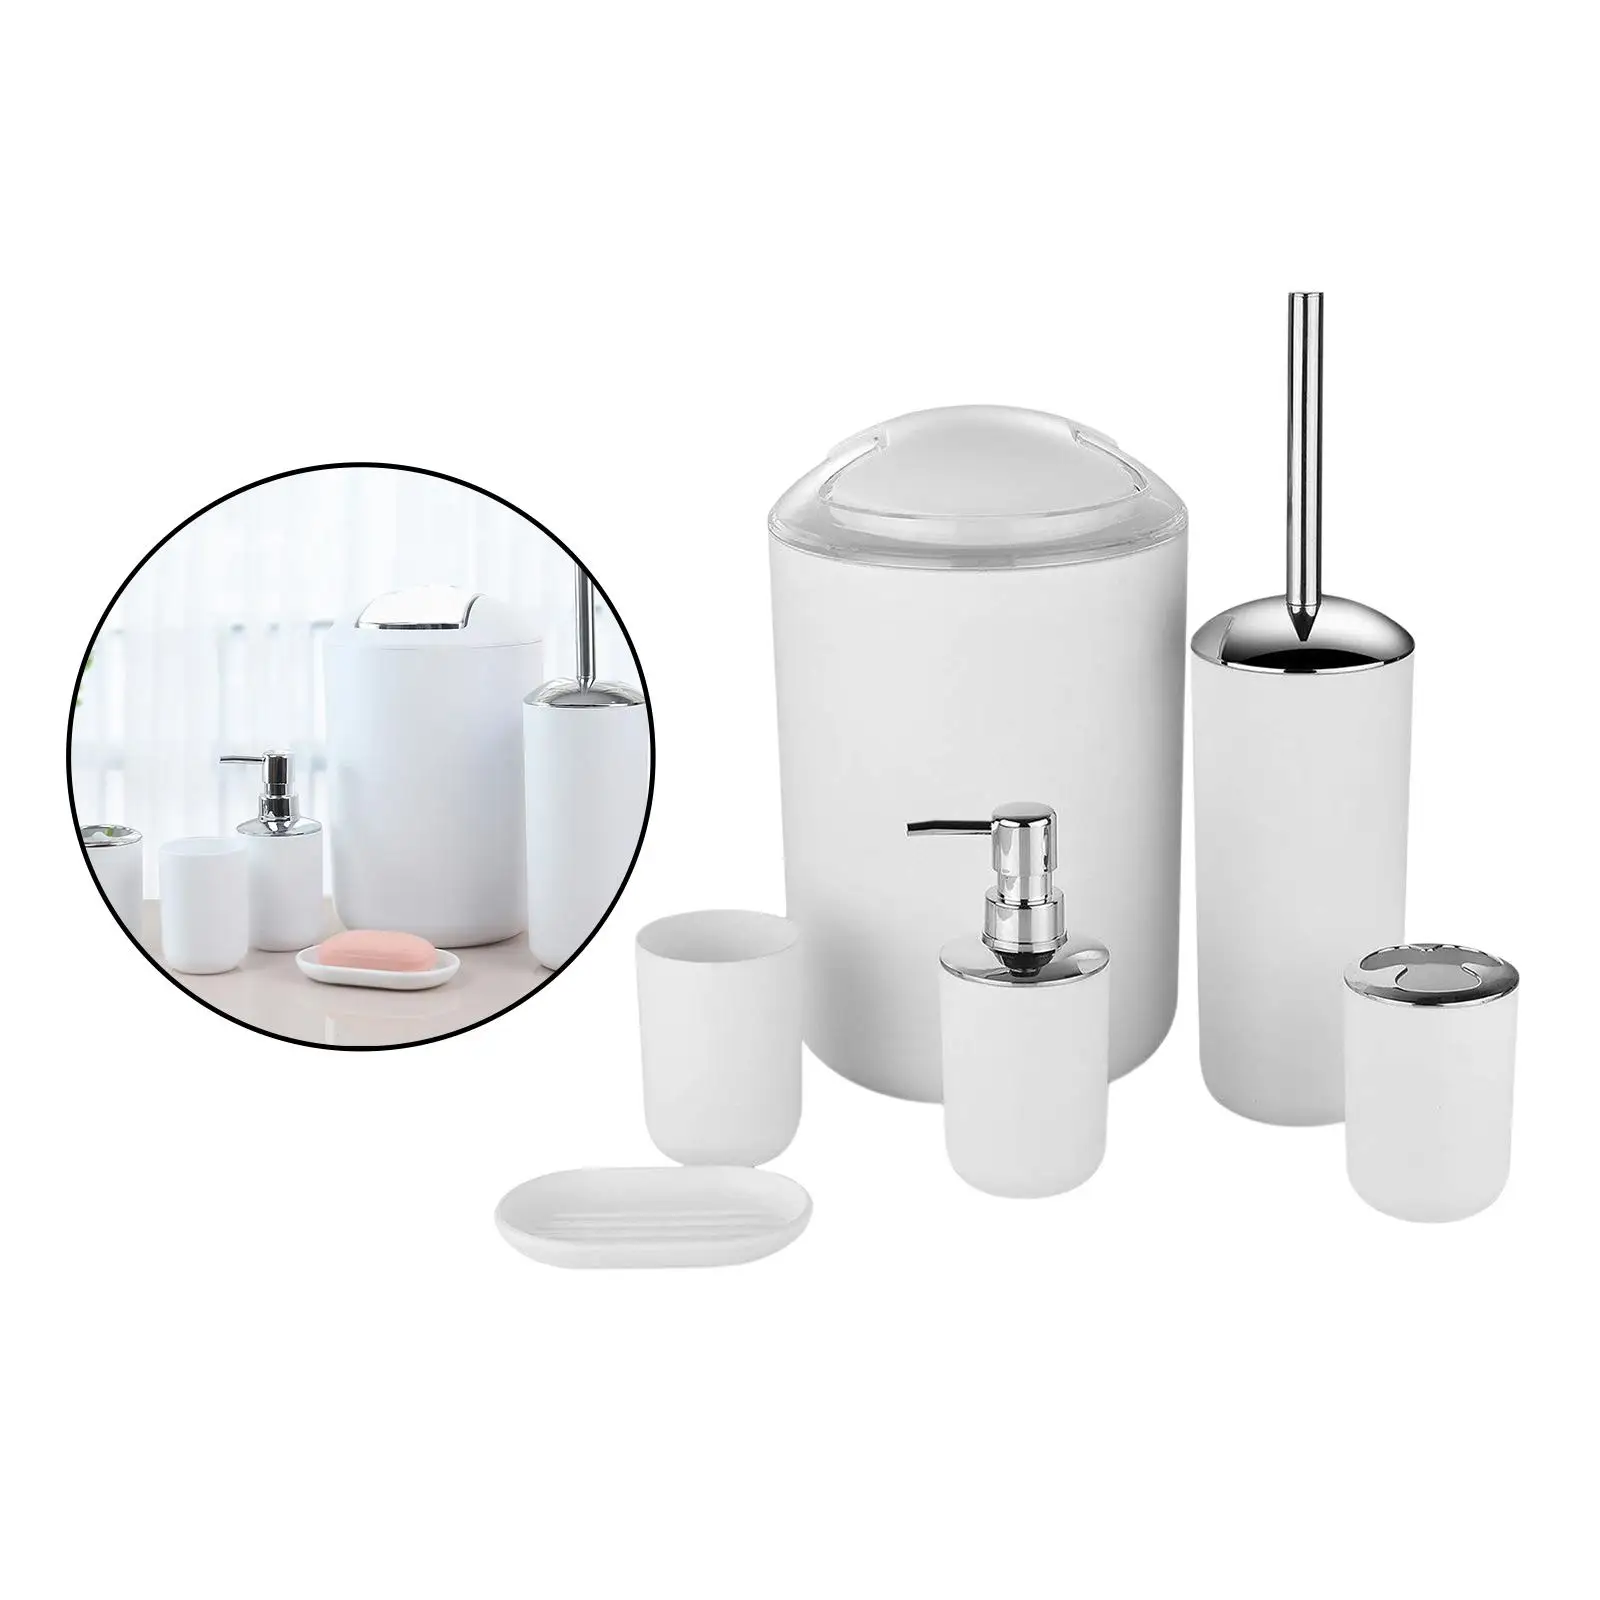 6x Bathroom Toothbrush Cup Dish Toilet Brush Holder Trash Can